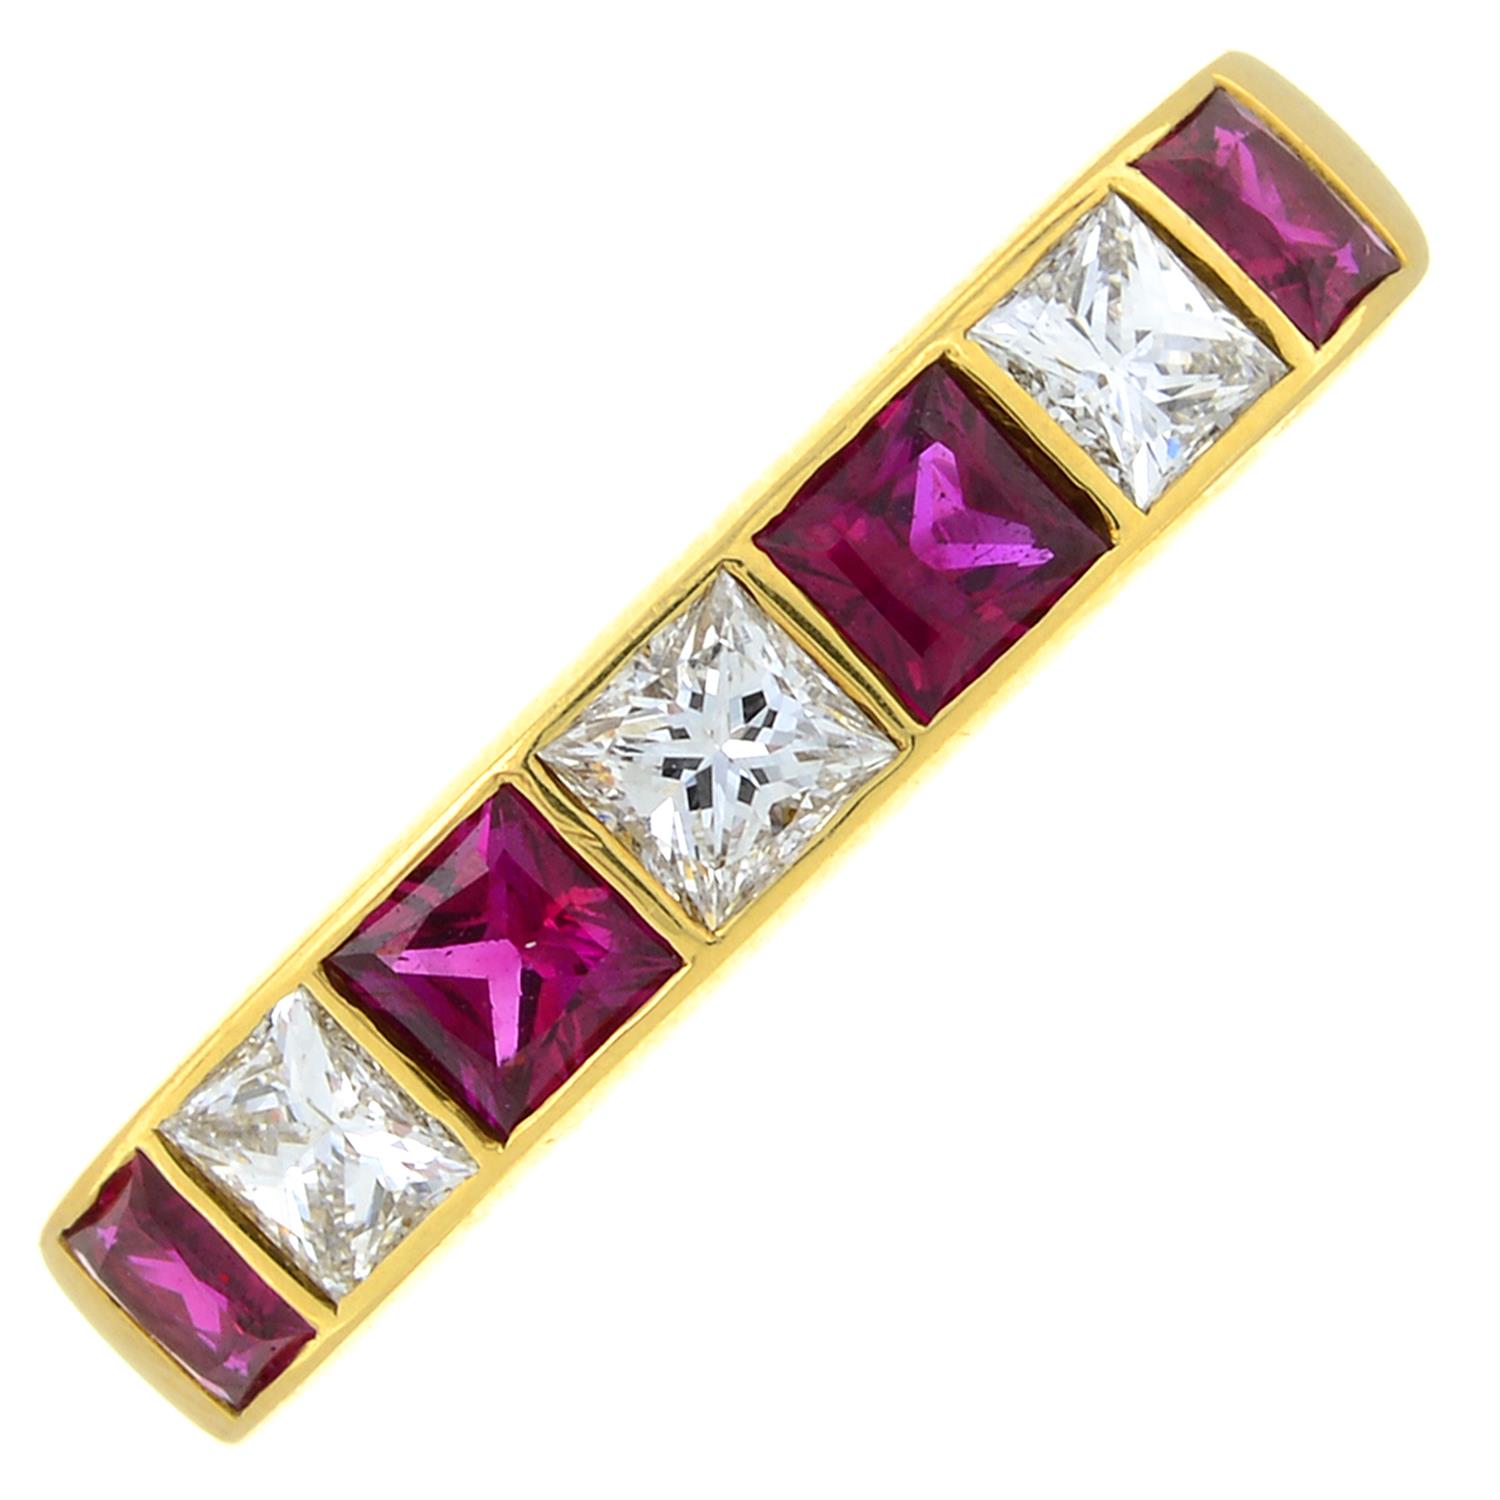 An 18ct gold ruby and diamond band ring.